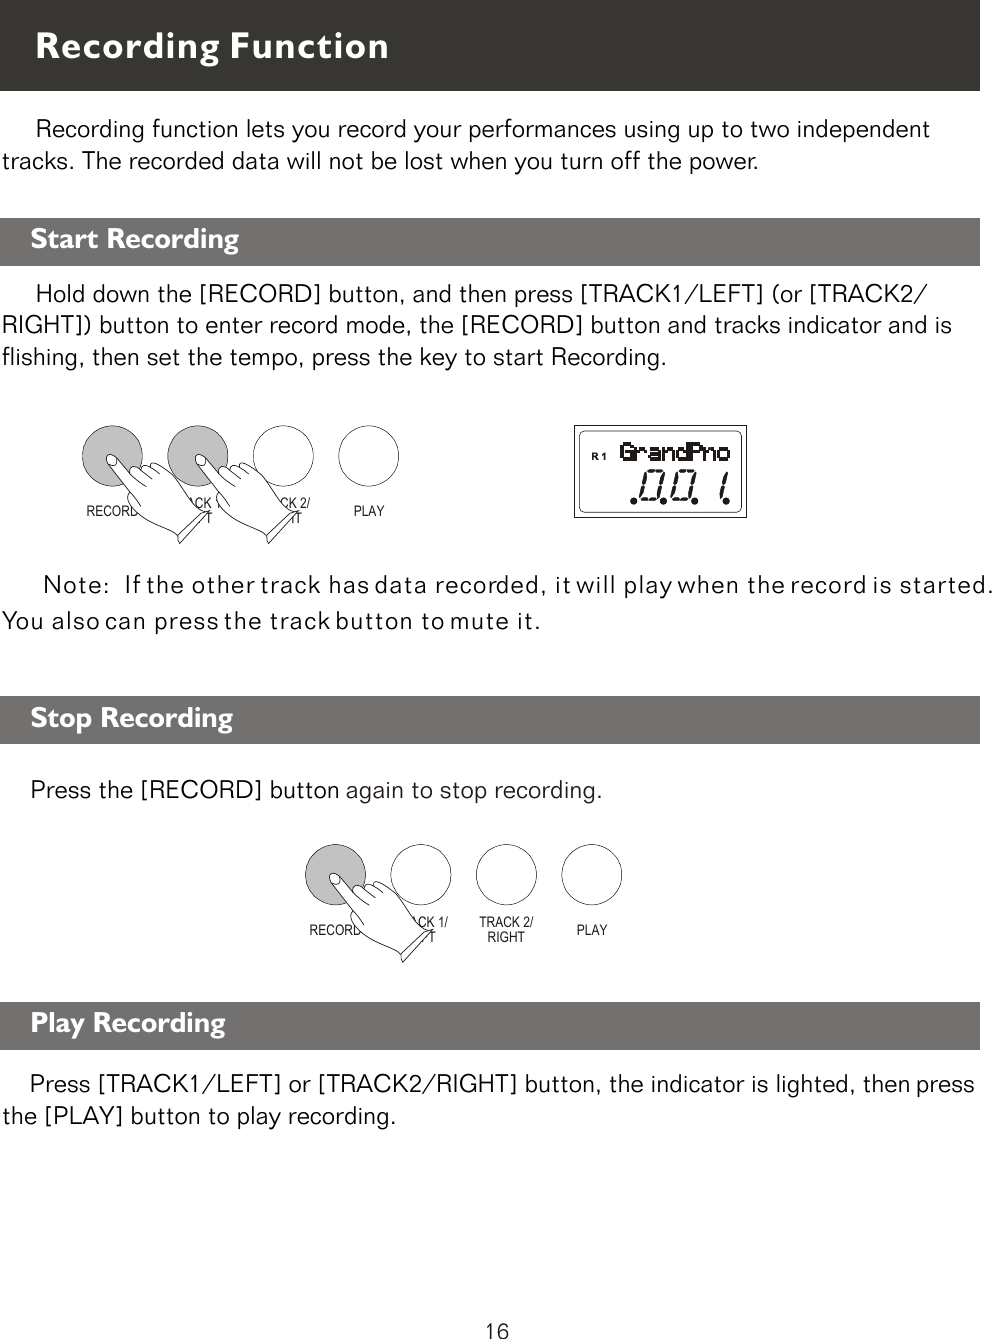 RECORDRECORDTRACK 1/LEFTTRACK 1/LEFTTRACK 2/RIGHTTRACK 2/RIGHTPLAYPLAY     Recording function lets you record your performances using up to two independent tracks. The recorded data will not be lost when you turn off the power.           Note:  If the other track has data recorded, it will play when the record is started. You also can press the track button to mute it.Recording FunctionStart Recording     Hold down the [RECORD] button, and then press [TRACK1/LEFT] (or [TRACK2/RIGHT]) button to enter record mode, the [RECORD] button and tracks indicator and is flishing, then set the tempo, press the key to start Recording.           Press [TRACK1/LEFT] or [TRACK2/RIGHT] button, the indicator is lighted, then press  the [PLAY] button to play recording.    Stop RecordingPress the [RECORD] button again to stop recording.Play Recording 16